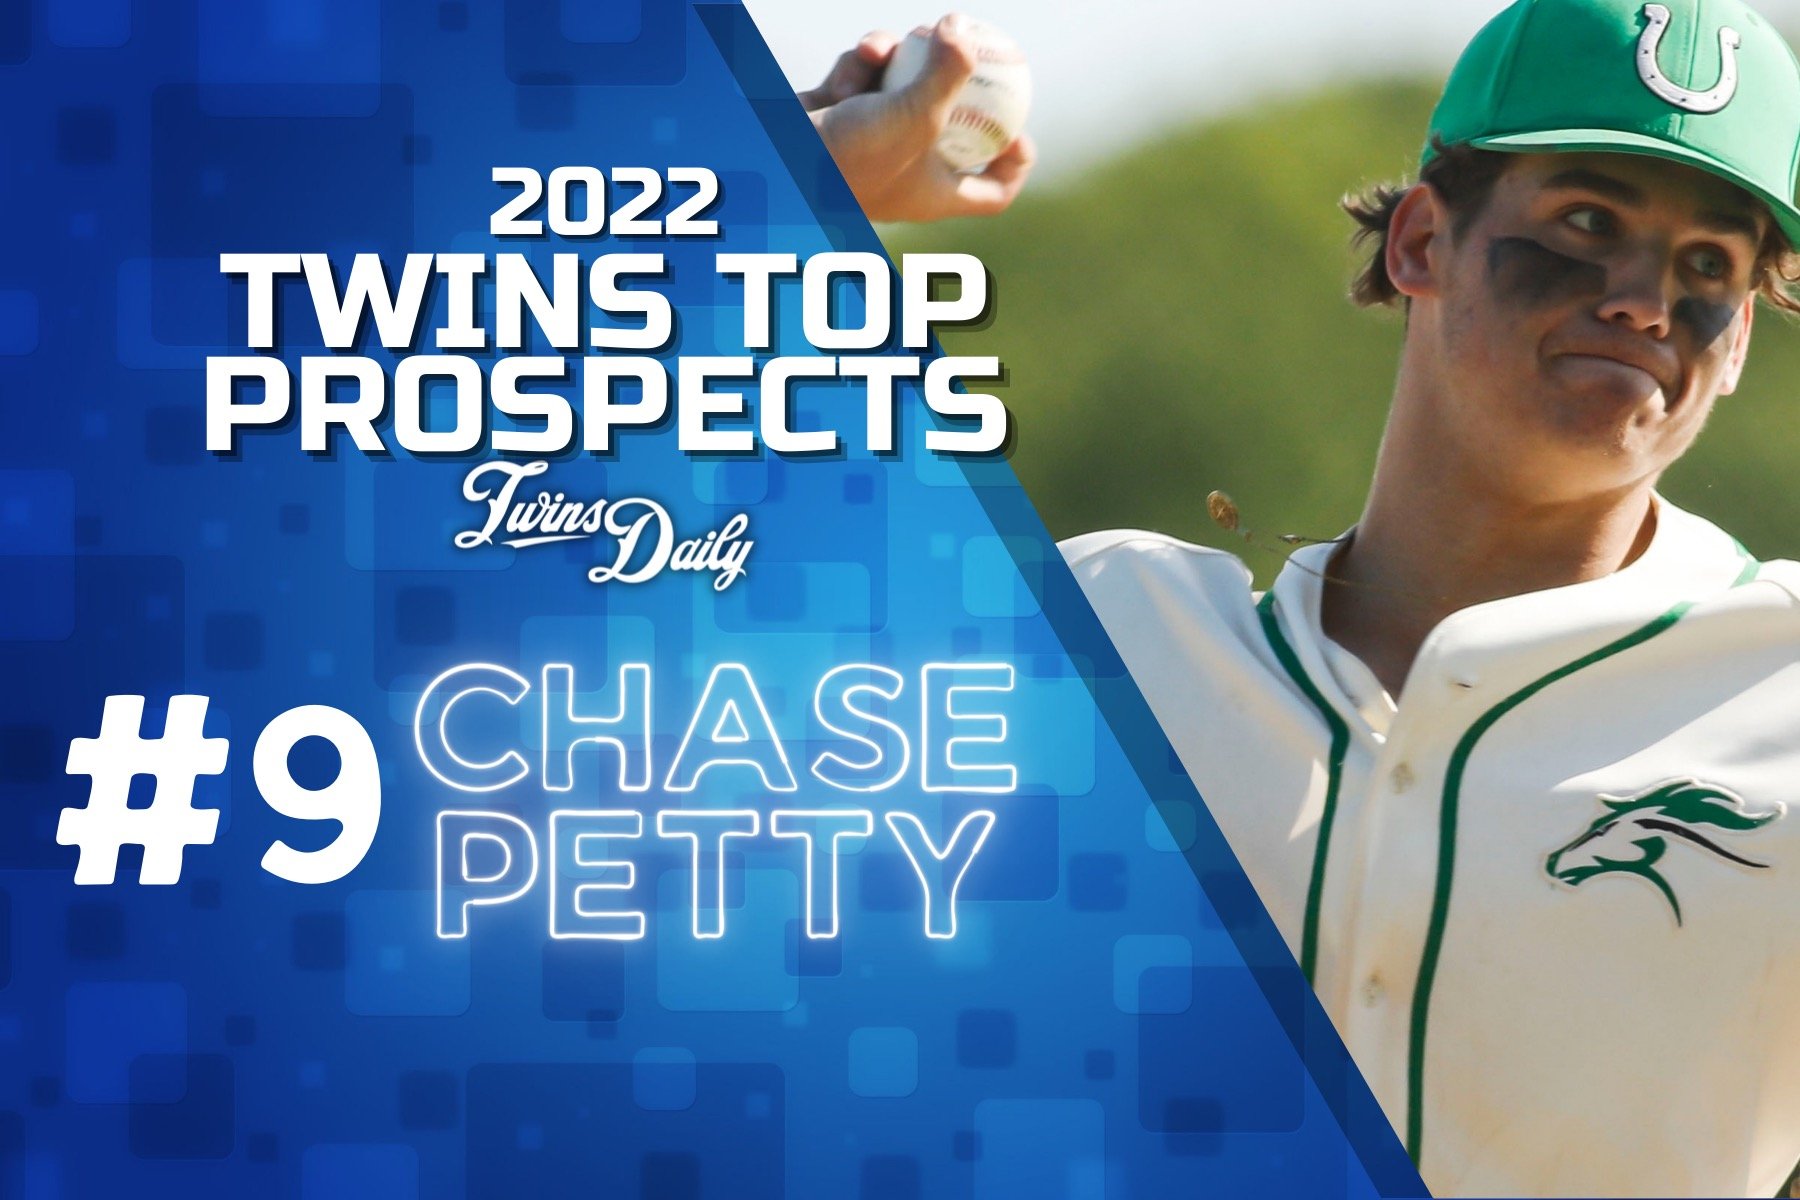 Twins Daily 2022 Top Prospects 9 Chase Petty Minor Leagues Twins